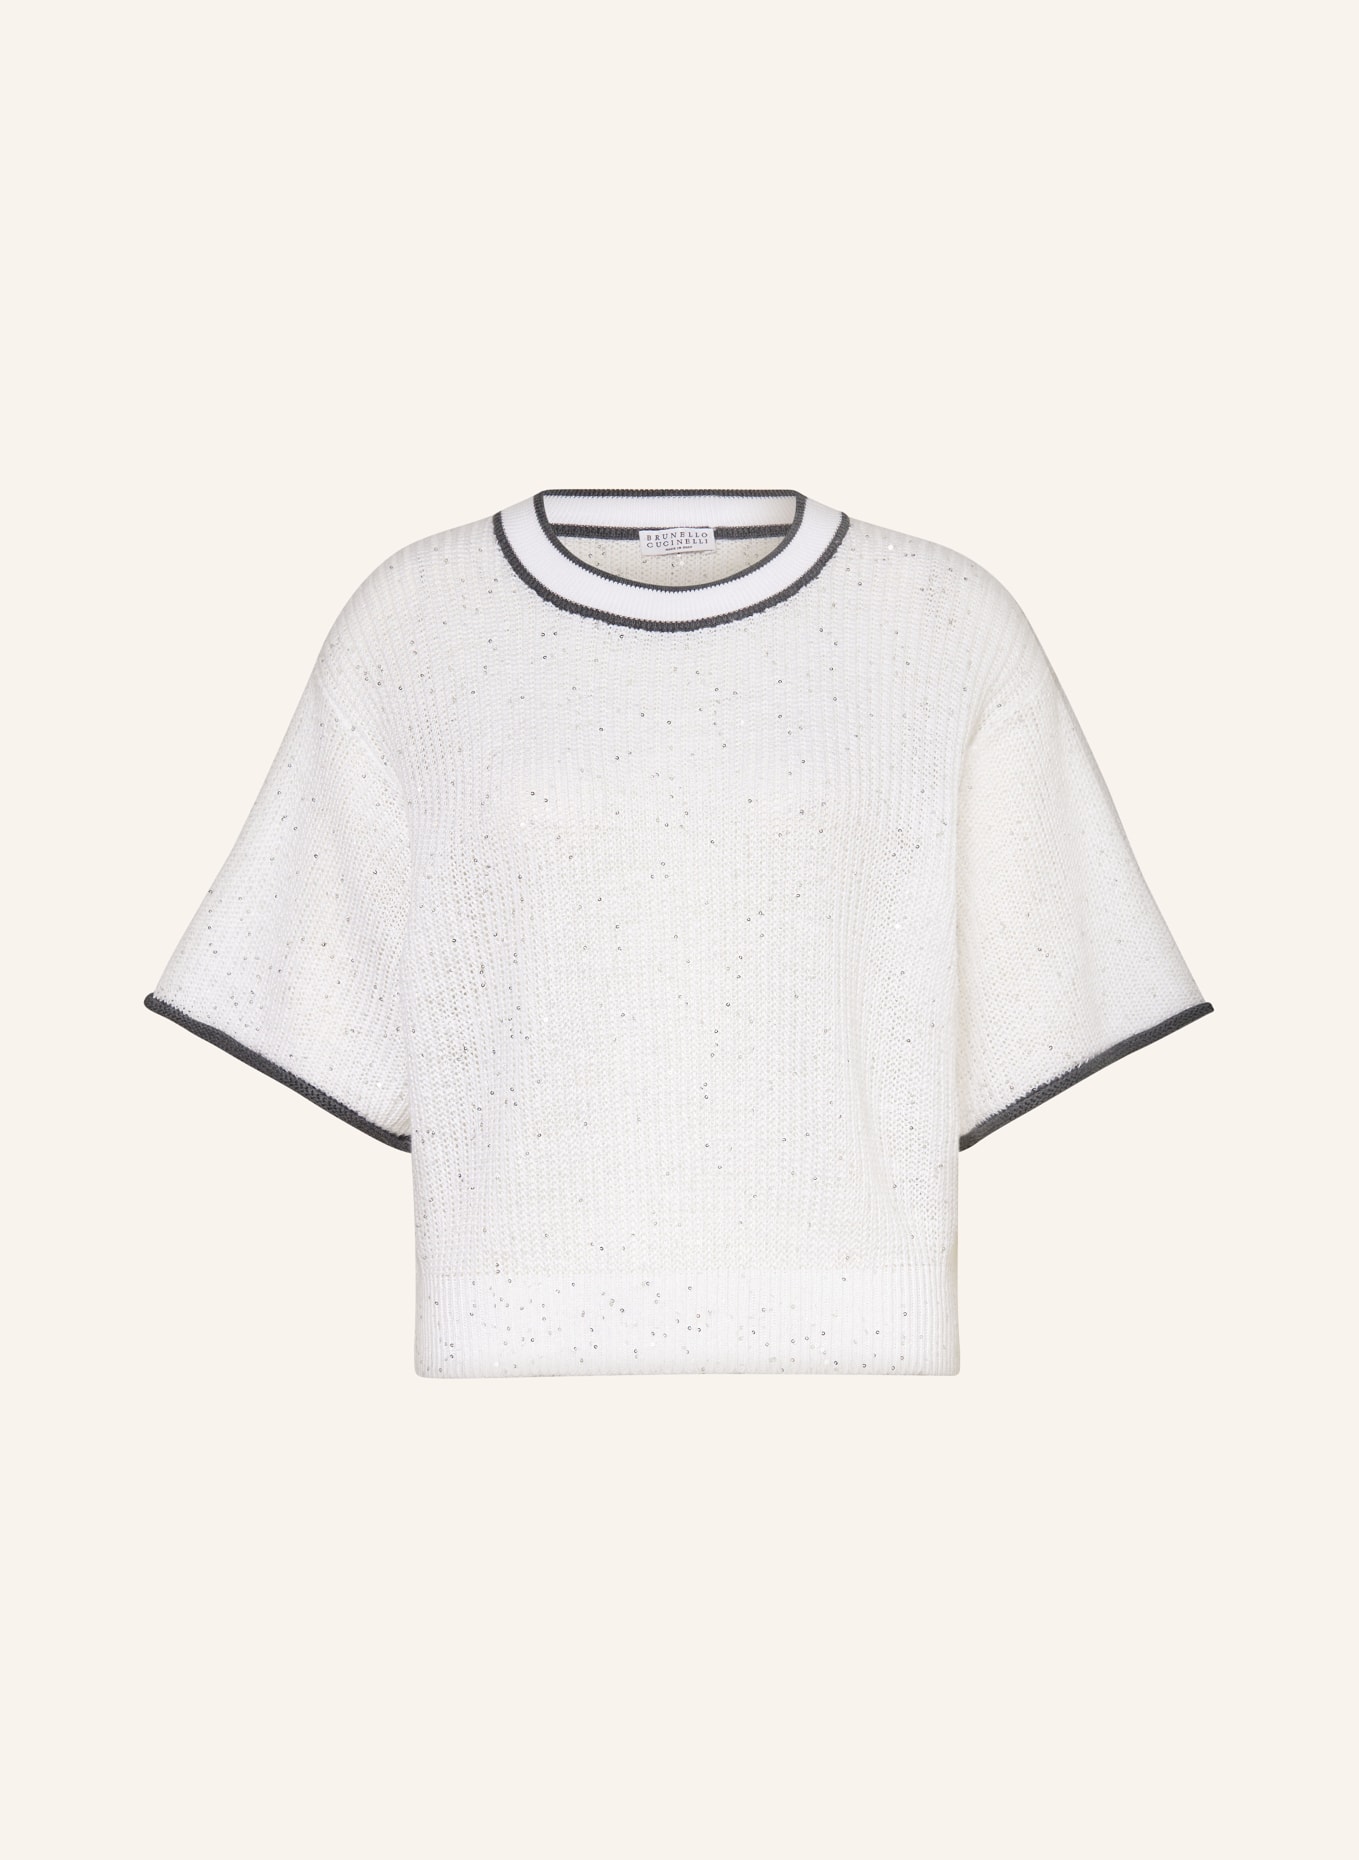 BRUNELLO CUCINELLI Knit shirt made of linen with sequins, Color: WHITE/ DARK GRAY (Image 1)